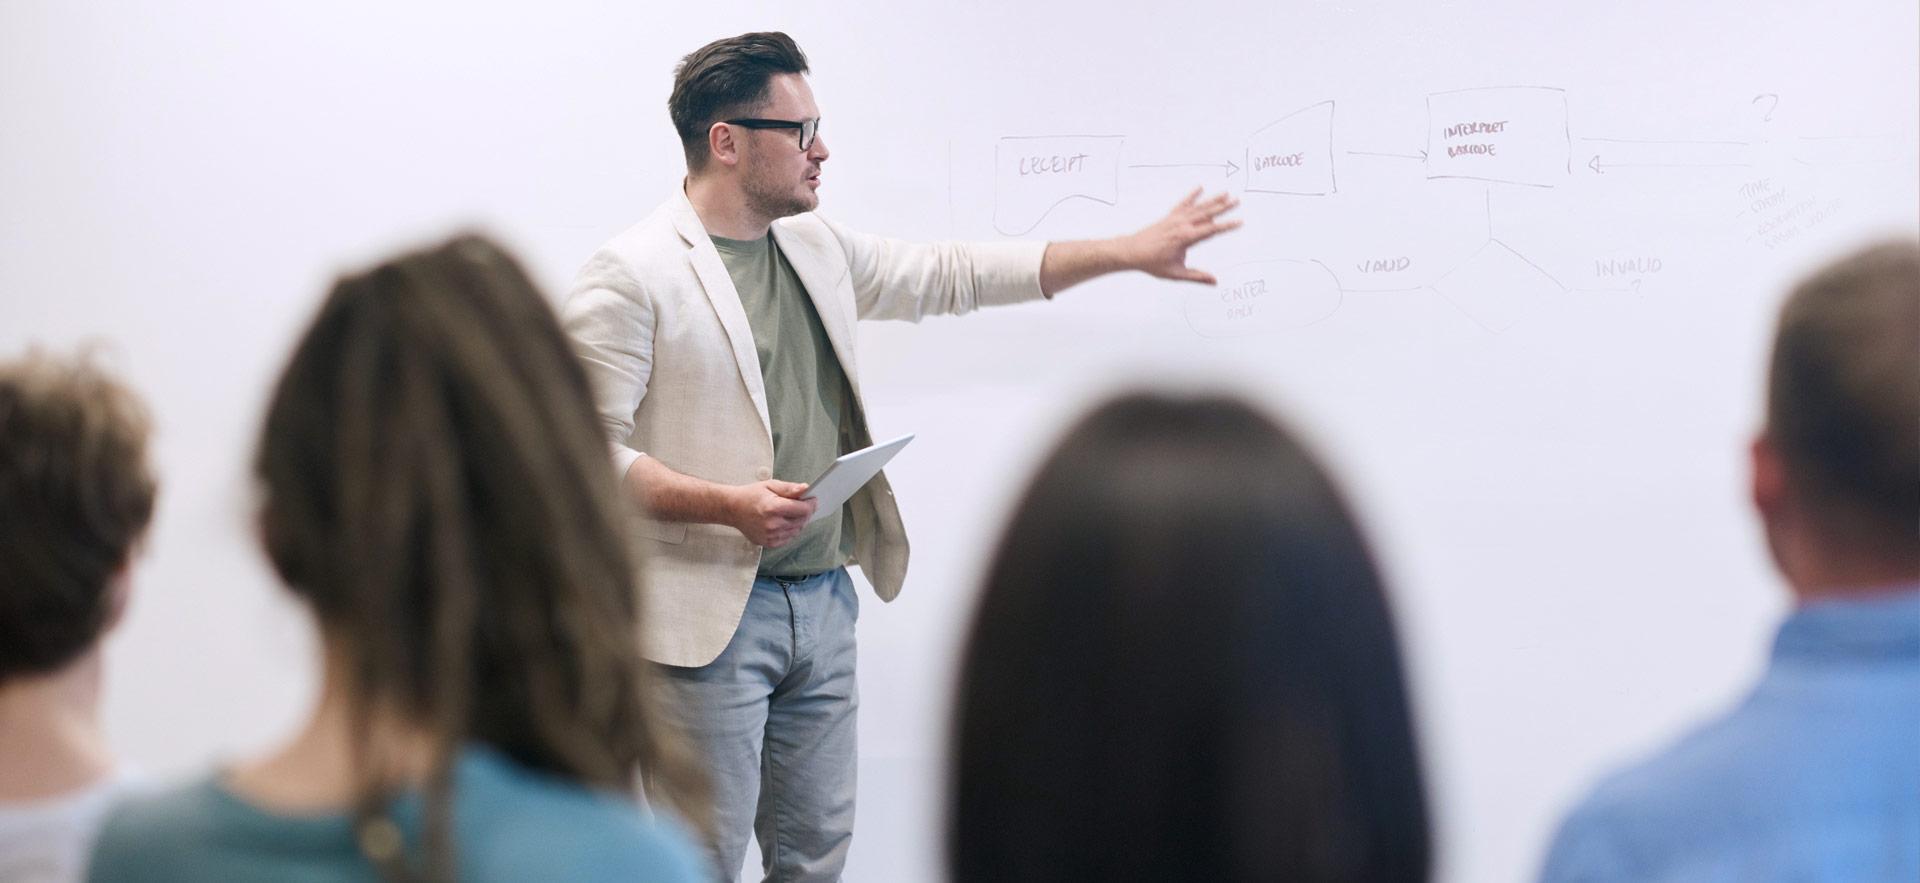 male making presentation at whiteboard for small group of people